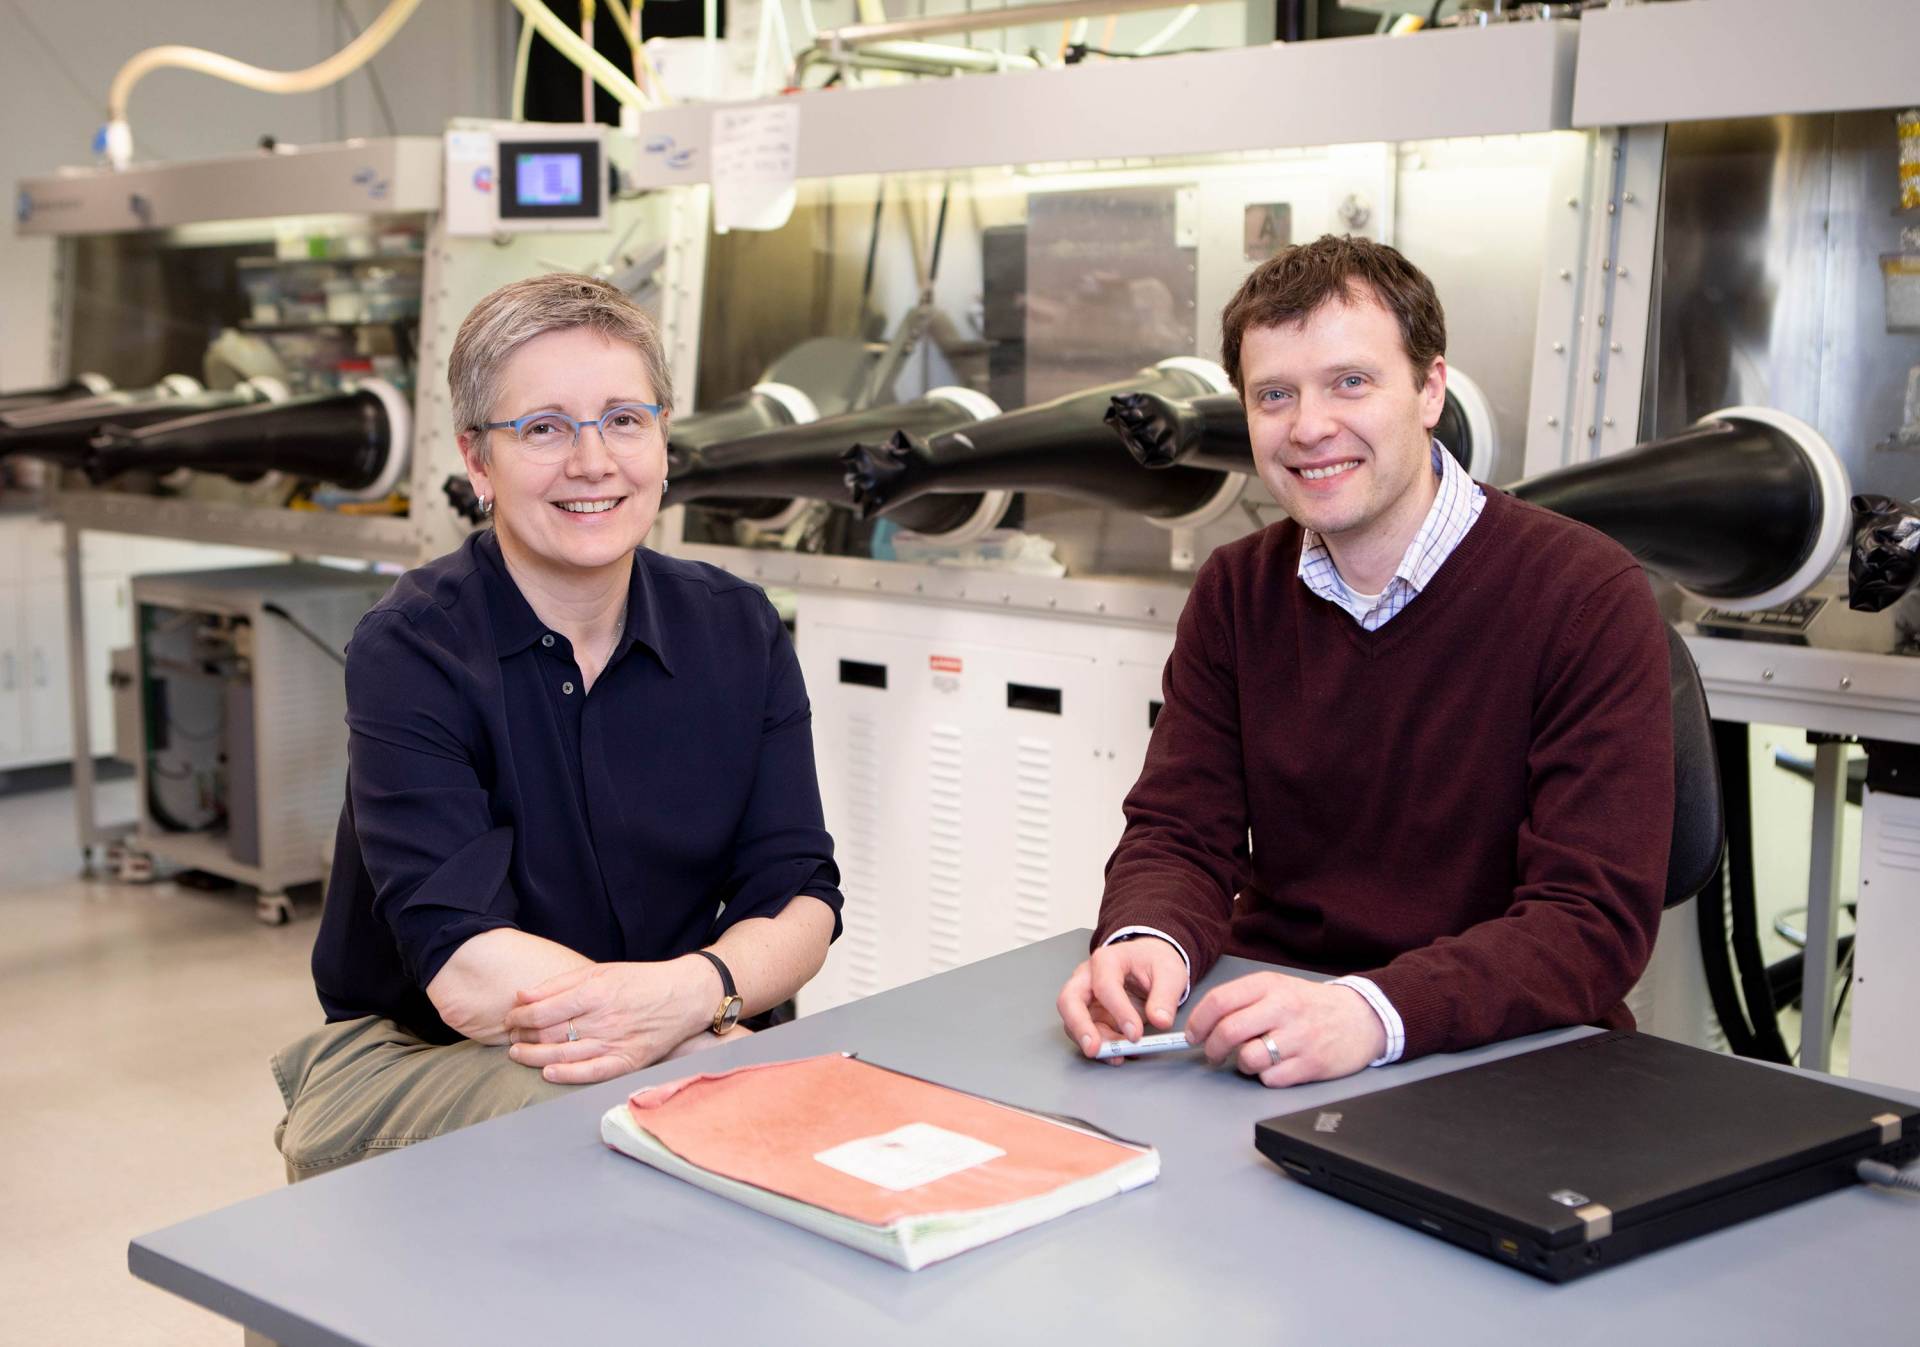 Two scientists, a woman and man, sit at table in lab and pose for photo